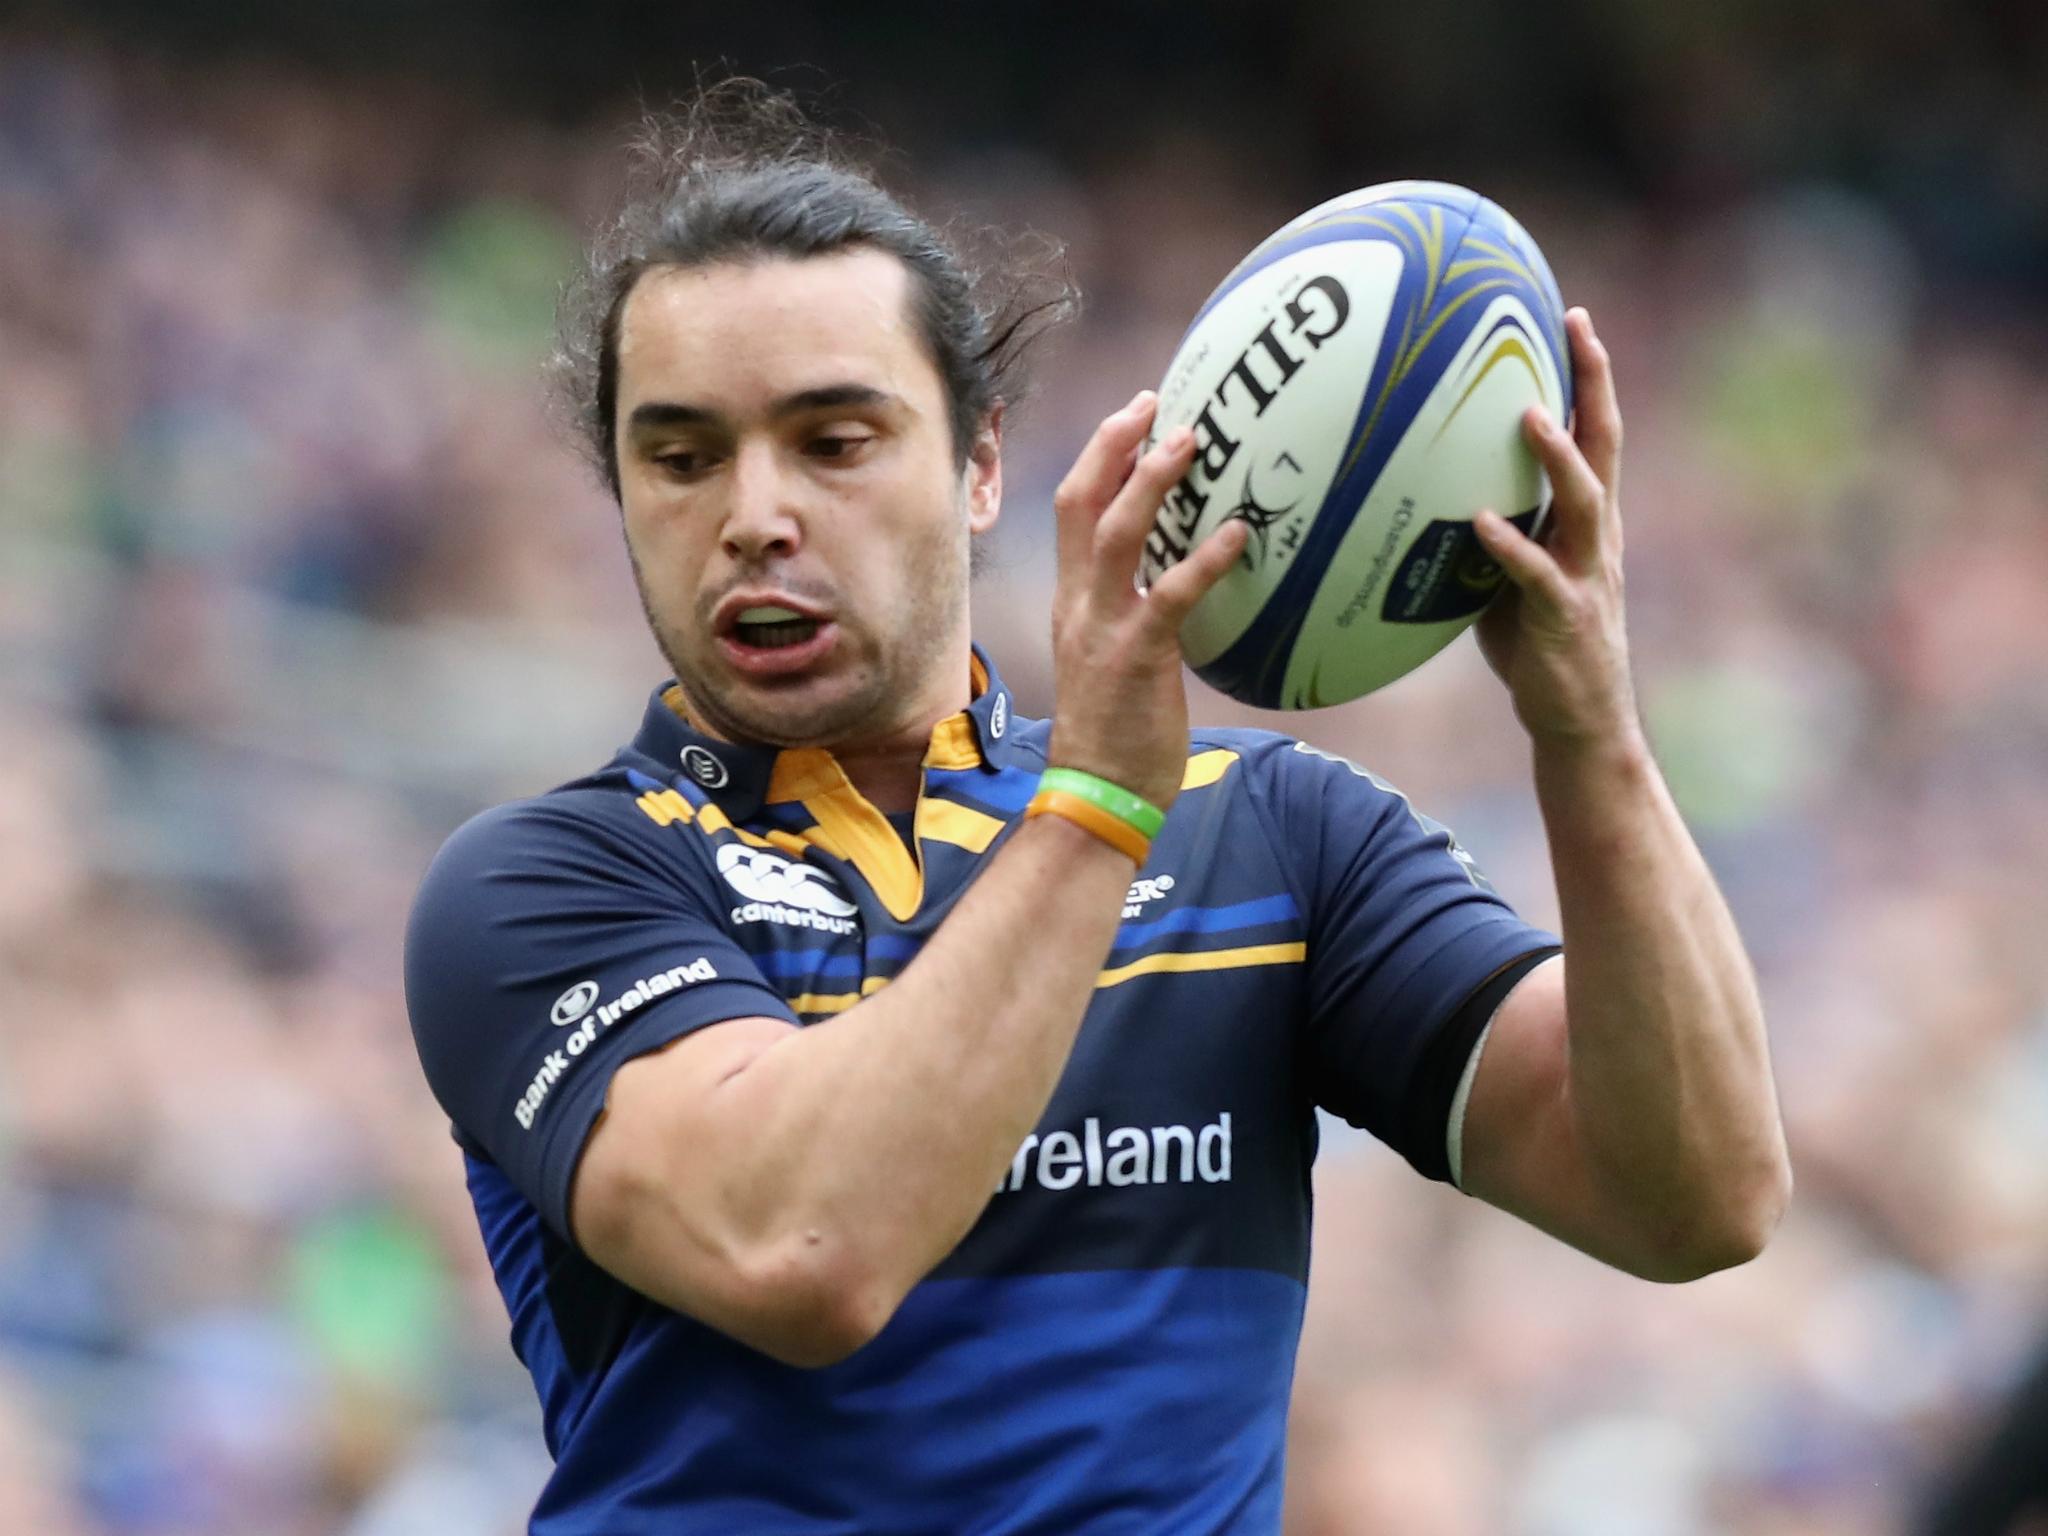 James Lowe has been left out of the Leinster side for the European Champions Cup final